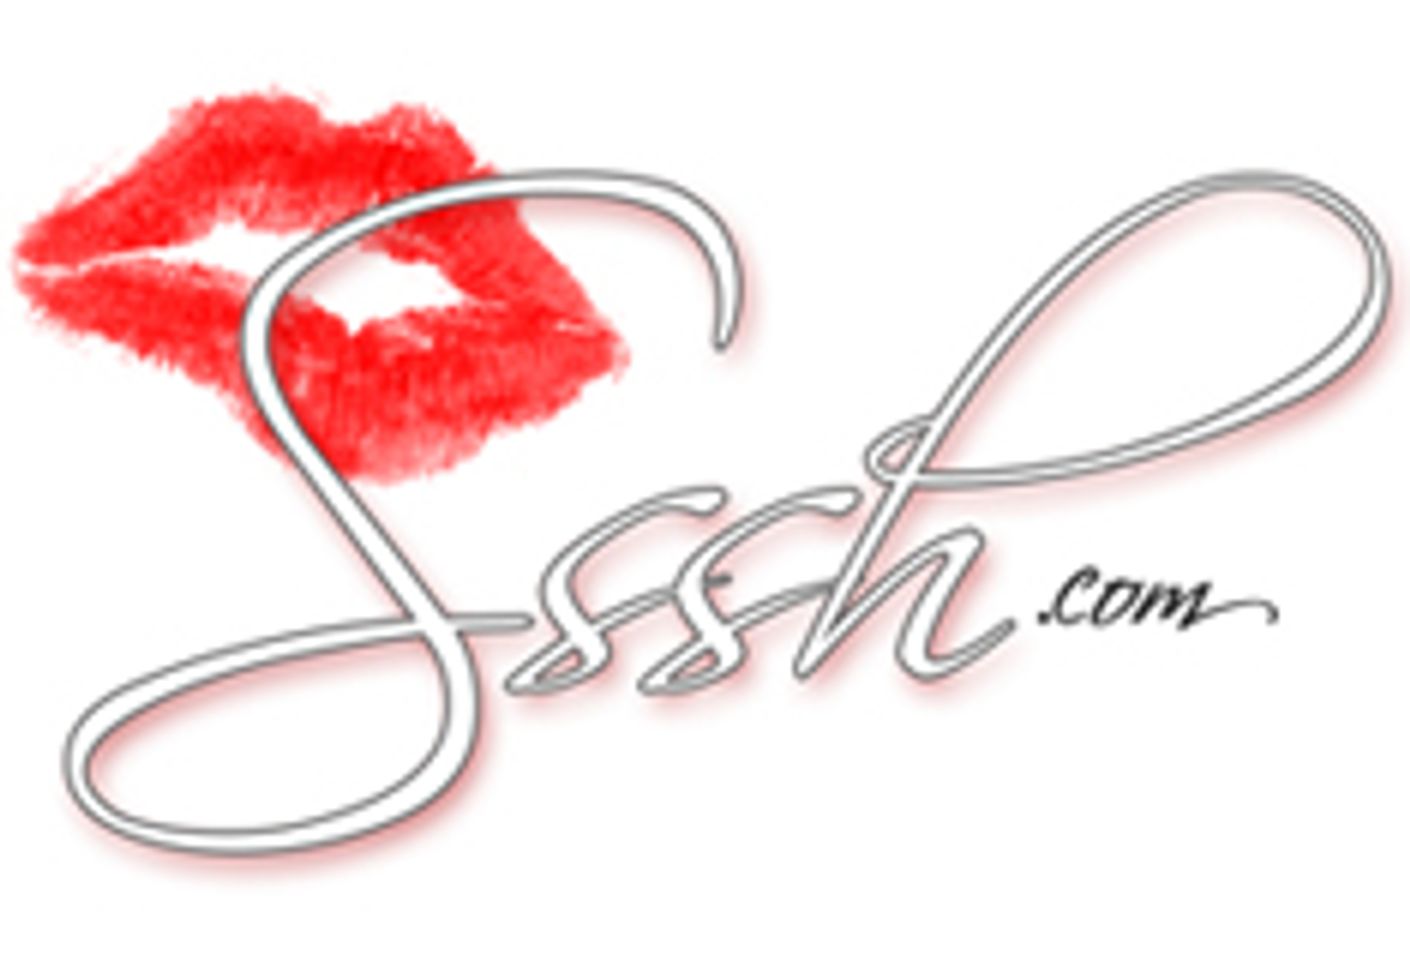 Women's Site Sssh.com Revamps Look and Features